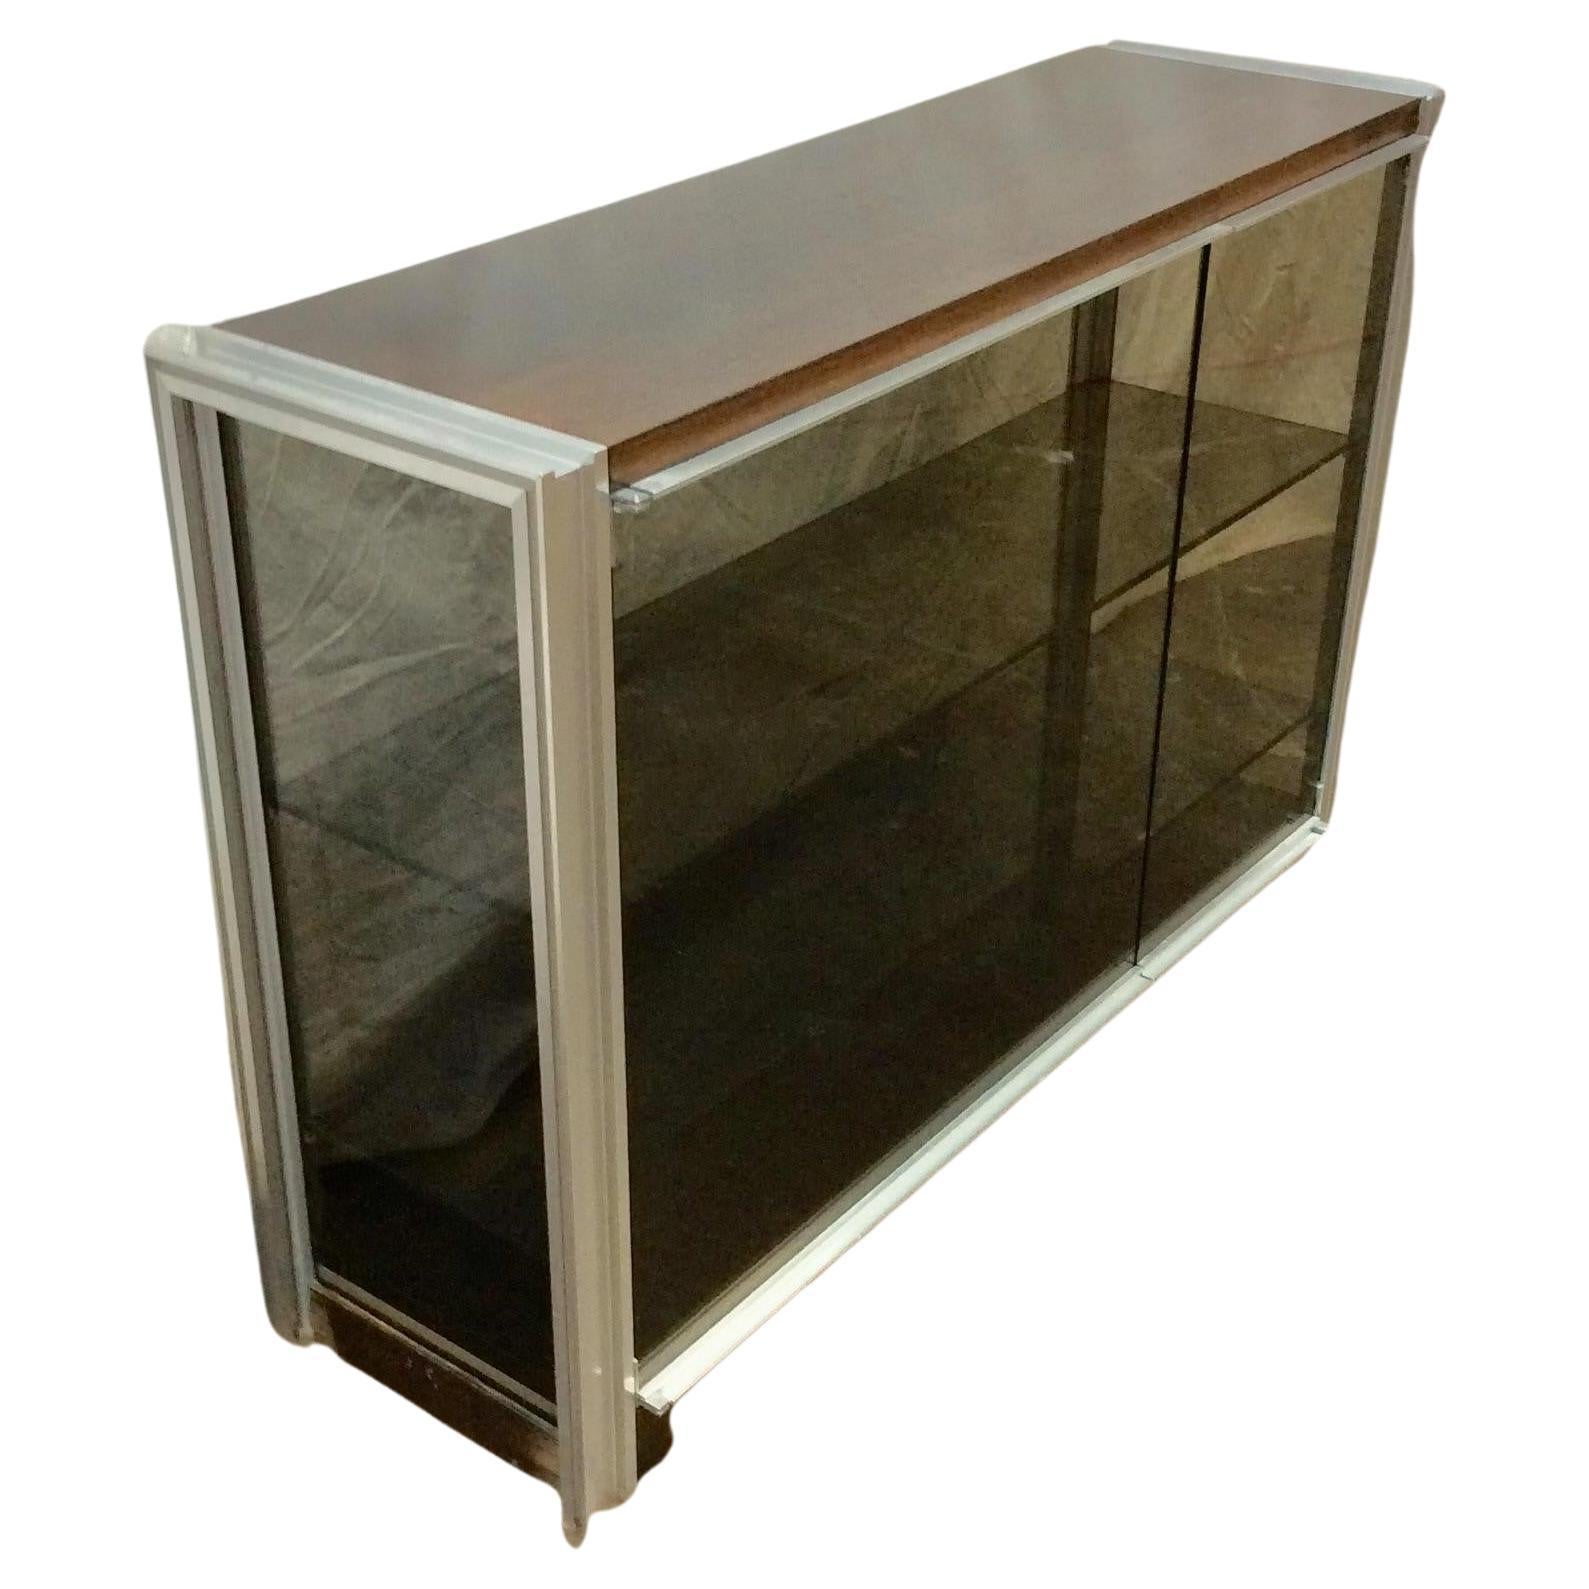 Found in the South of France, this beautiful symmetric shaped 1970s Vintage French Claude Gaillard Console or Credenza Designed for Ligne Roset features a sleek brushed aluminum light weighted frame, a wood top and bottom. The two doors open to